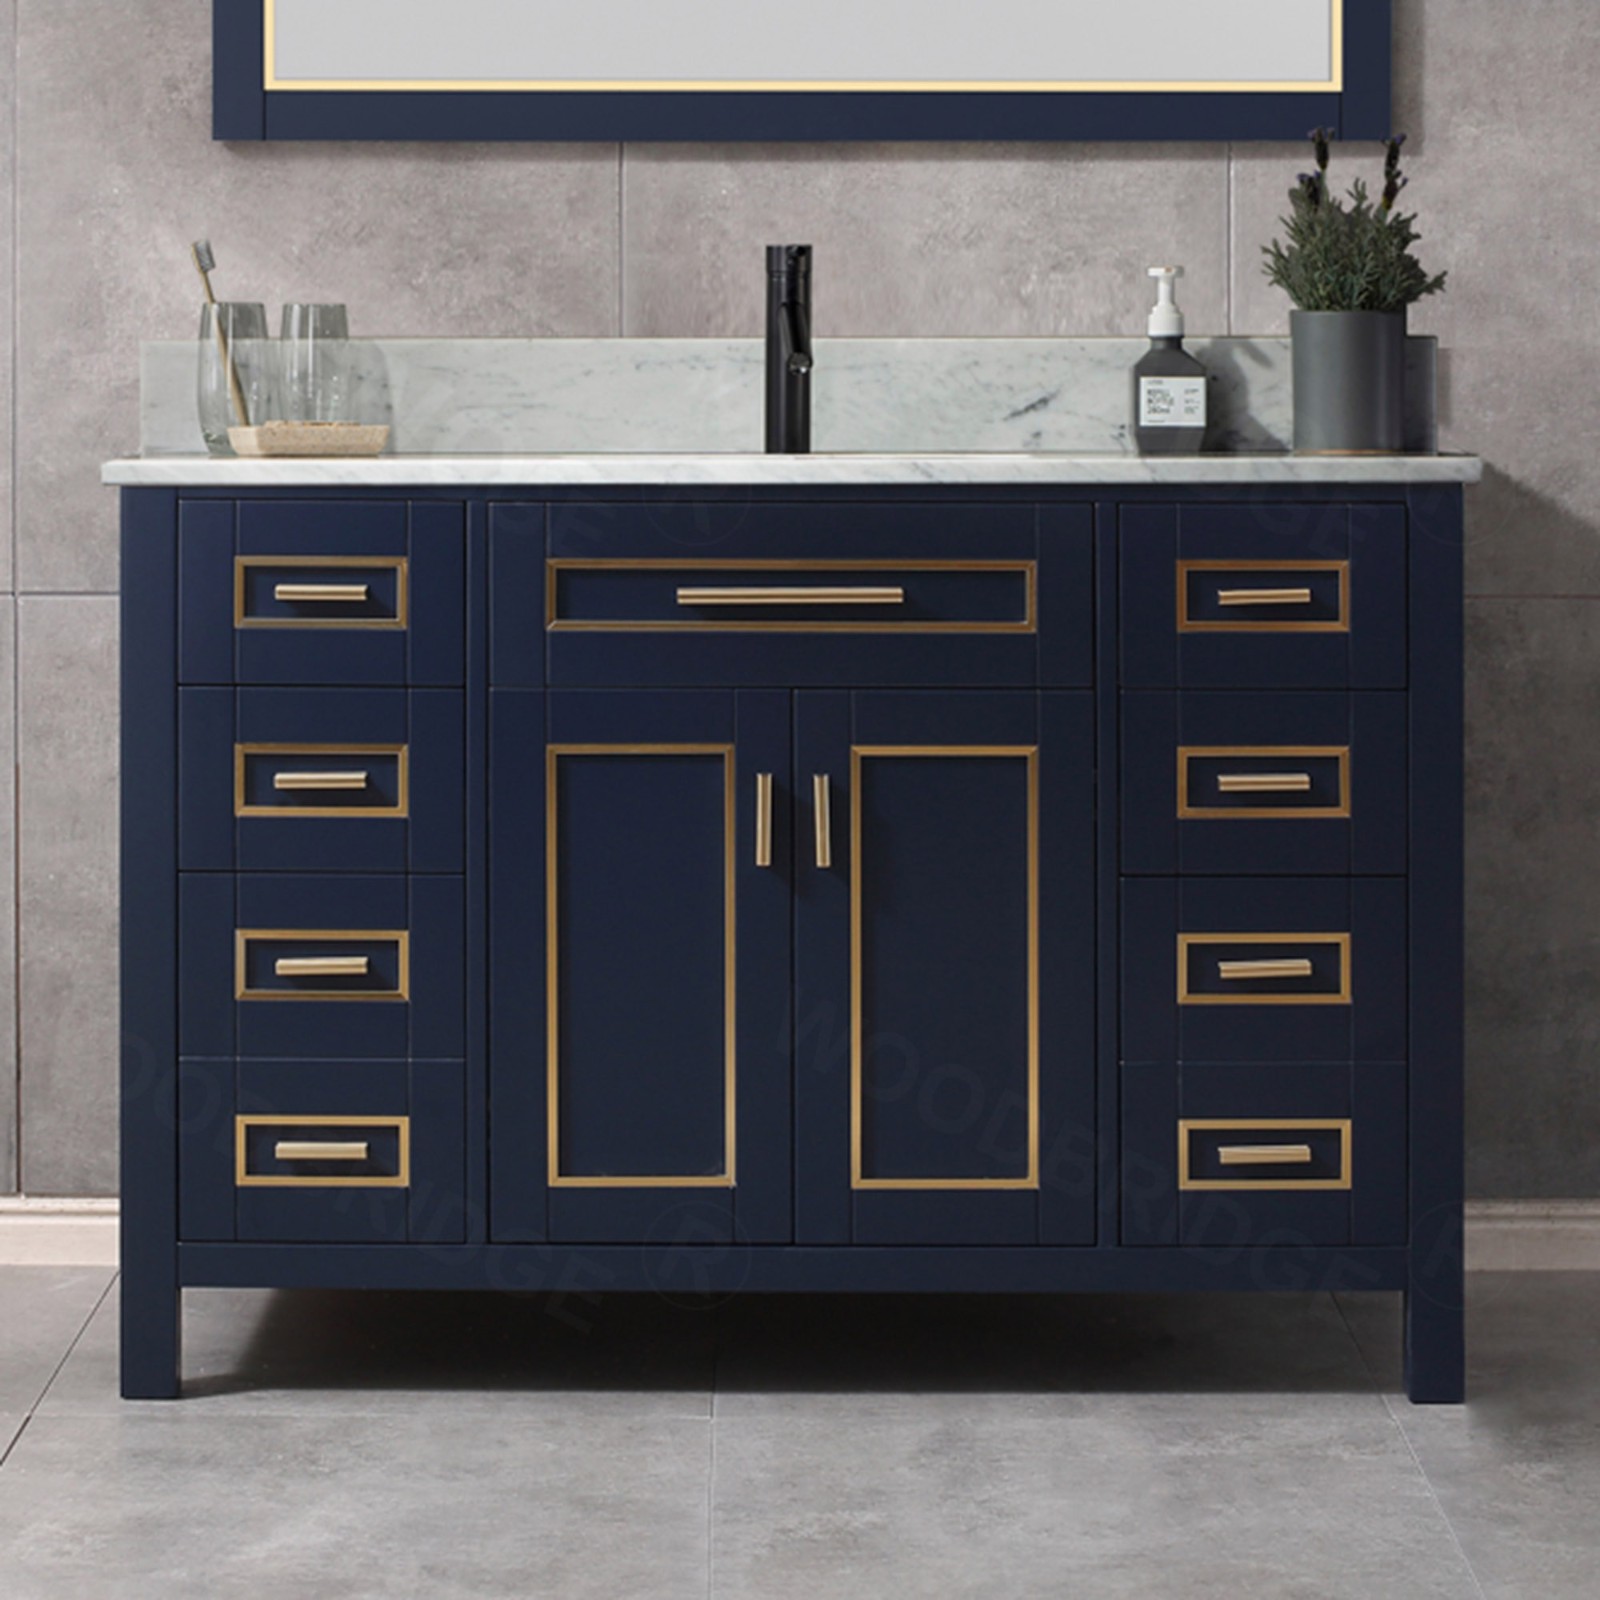  WOODBRIDGE Milan  49” Floor Mounted Single Basin Vanity Set with Solid Wood Cabinet in Navy Blue, and Carrara White Marble Vanity Top with Pre-installed Undermount Rectangle Bathroom Sink in White, Pre-Drilled Single Faucet Hole_4743